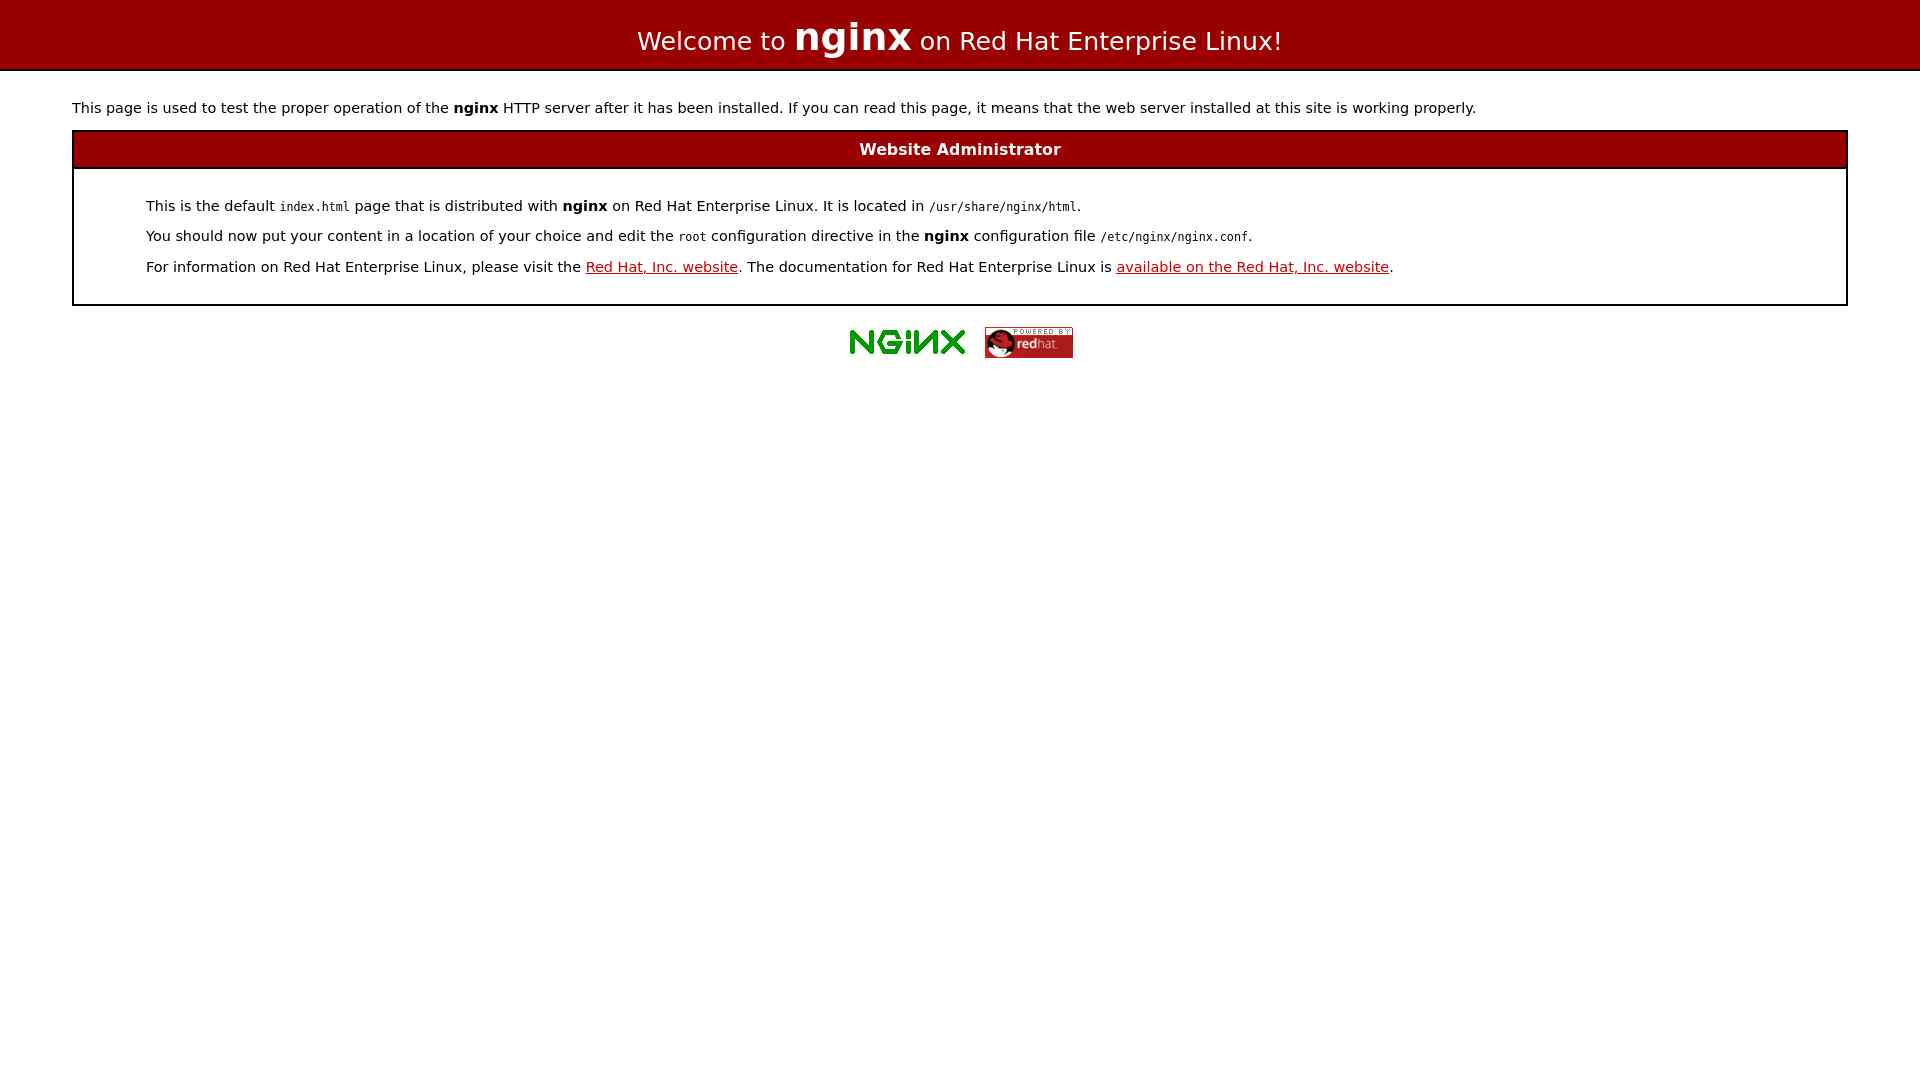 Test Page for the Nginx HTTP Server on Red Hat Enterprise Linux截图时间：2024-03-13